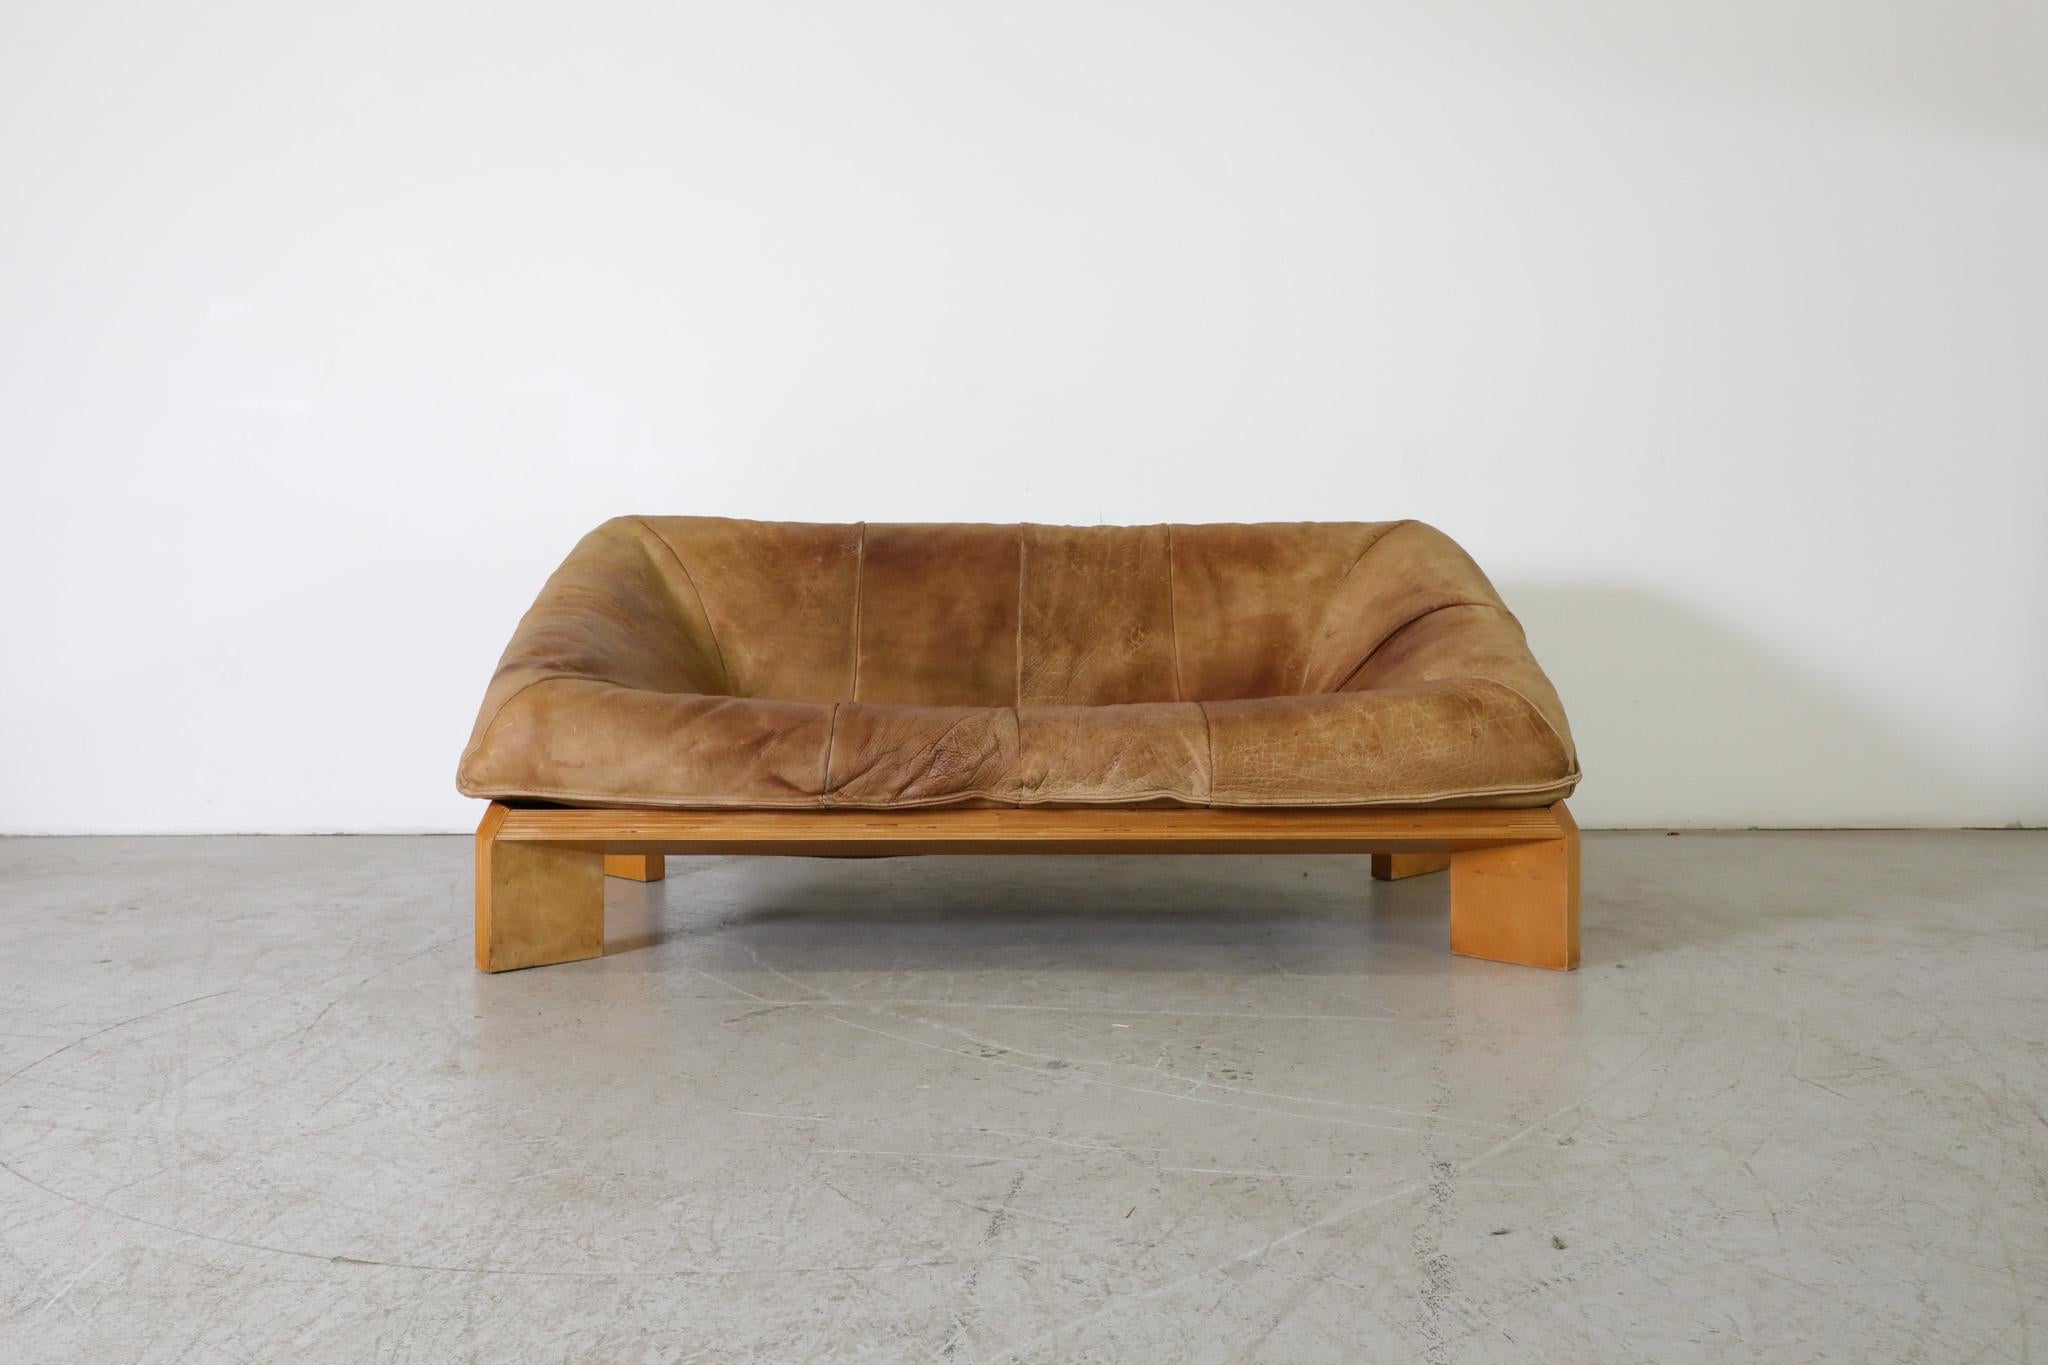 This Mid-Century, 'Oslo' sofa was designed by innovative and prolific Dutch designer Gerard van den Berg for the Montis company, the iconic furniture manufacturer of which Van den Berg was the co-founder and owner.. This wonderfully designed piece